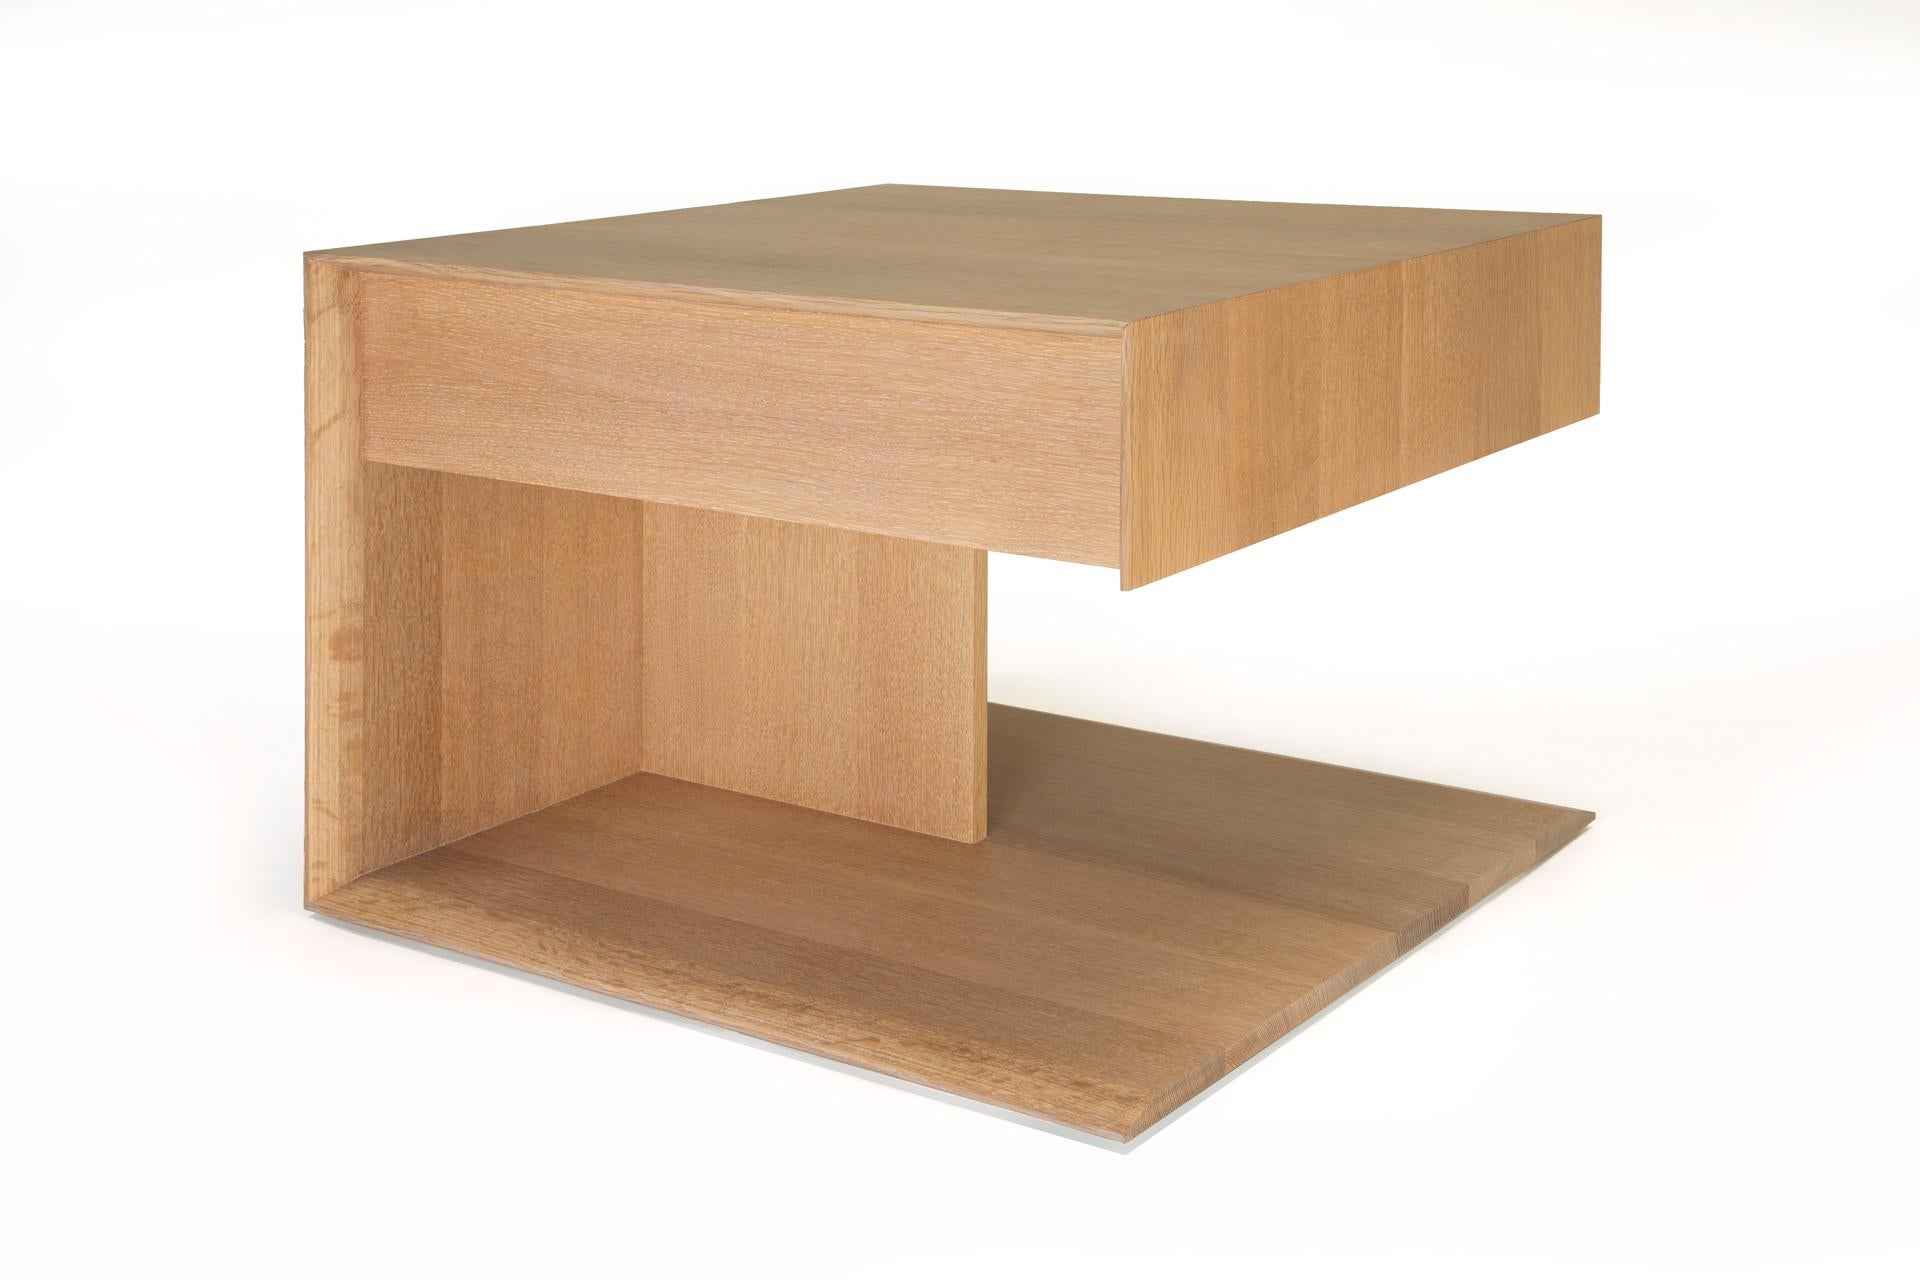 This large version of our modern wood end table it is called the 